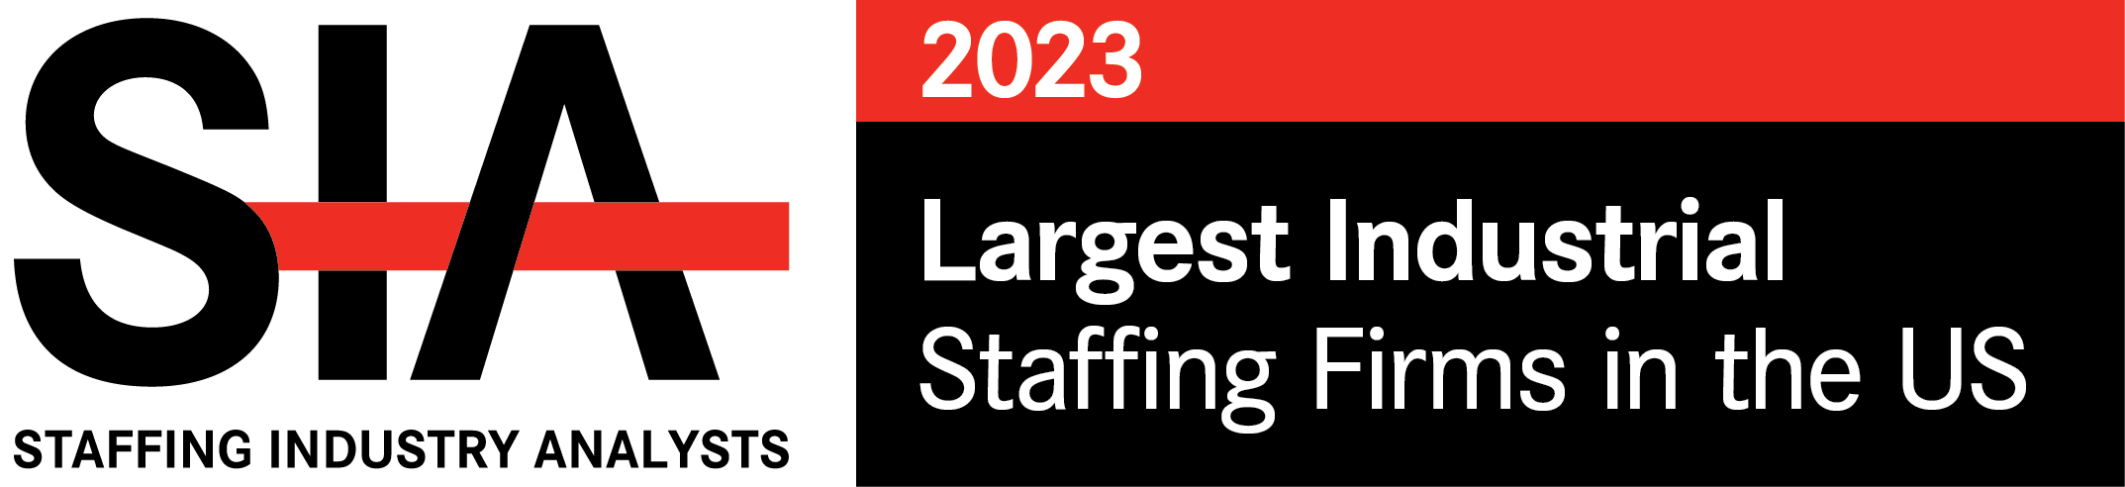 Staffing Industry Analysts Largest Industrial Staffing Firms in U.S. Logo